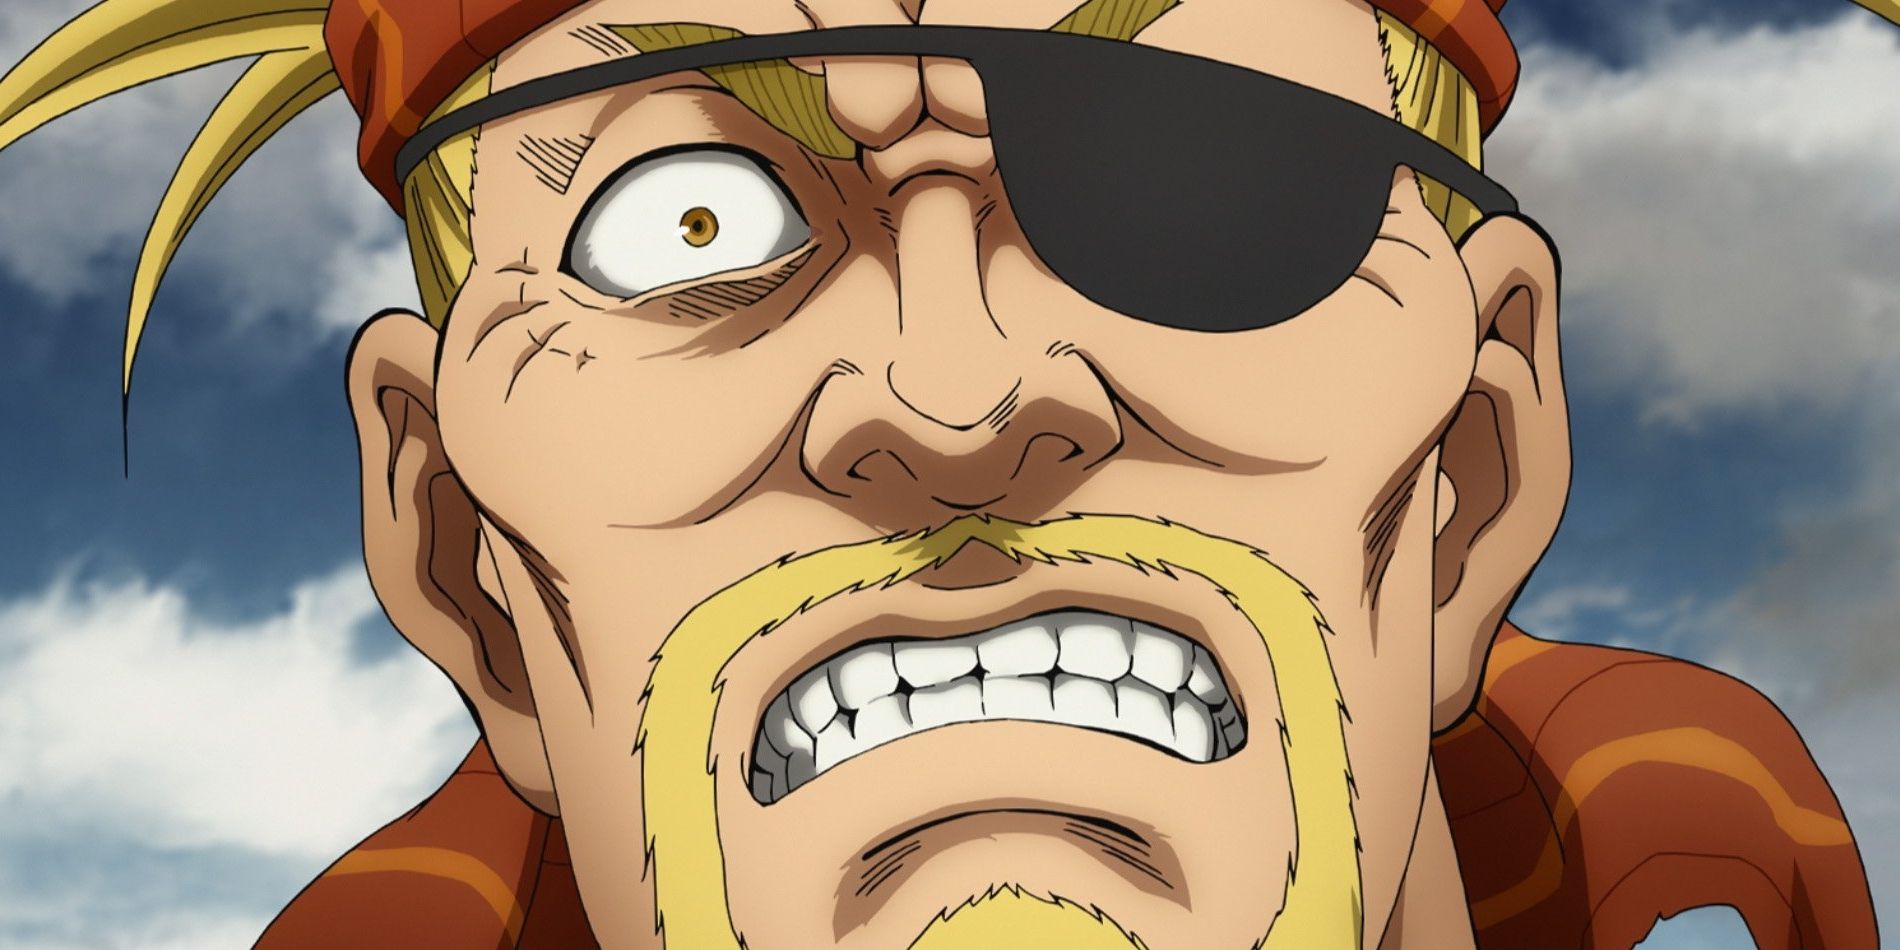 Thorkell angry with Canute